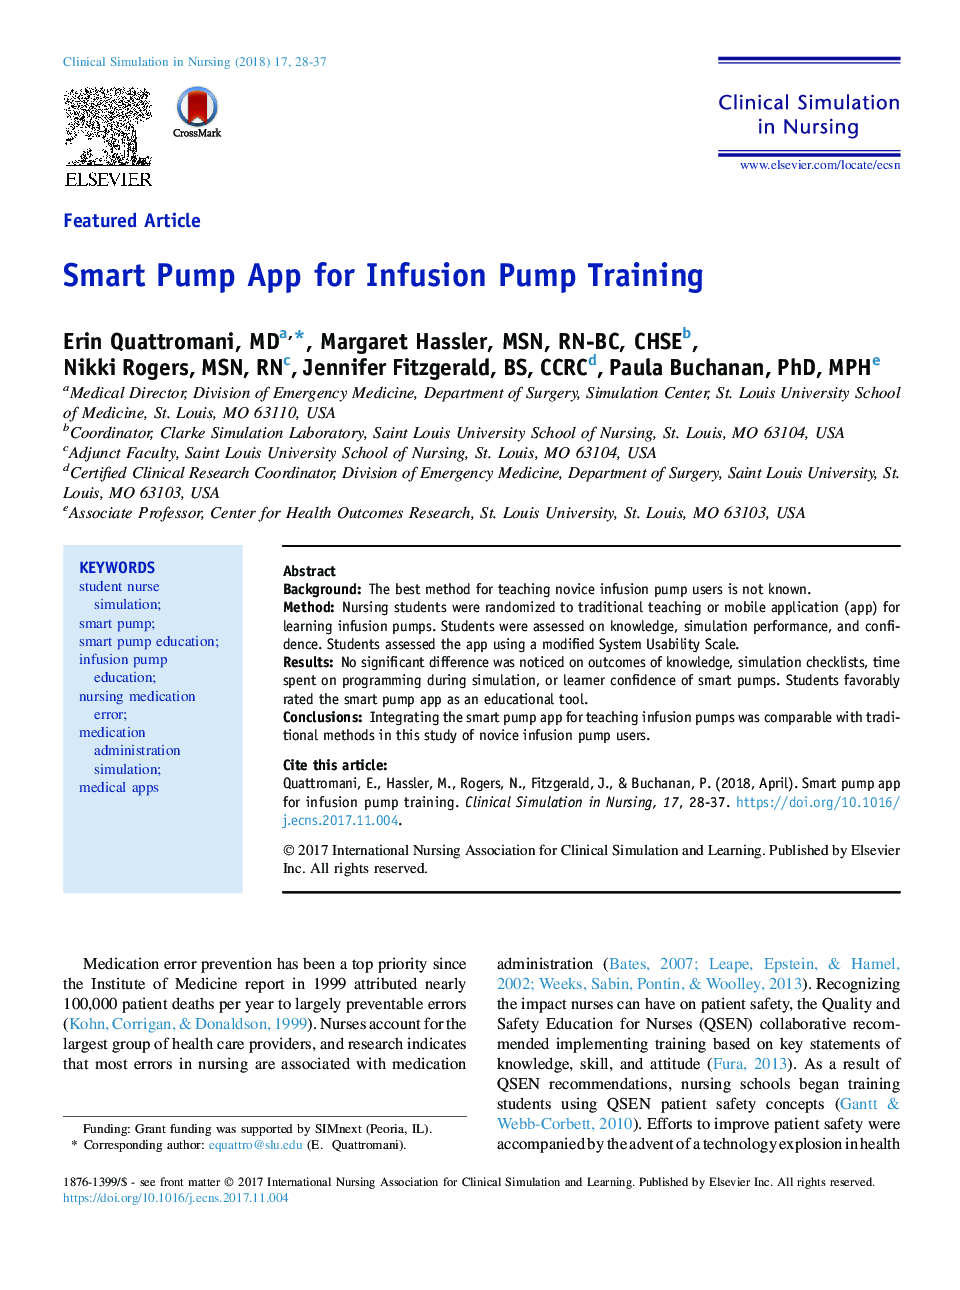 Smart Pump App for Infusion Pump Training